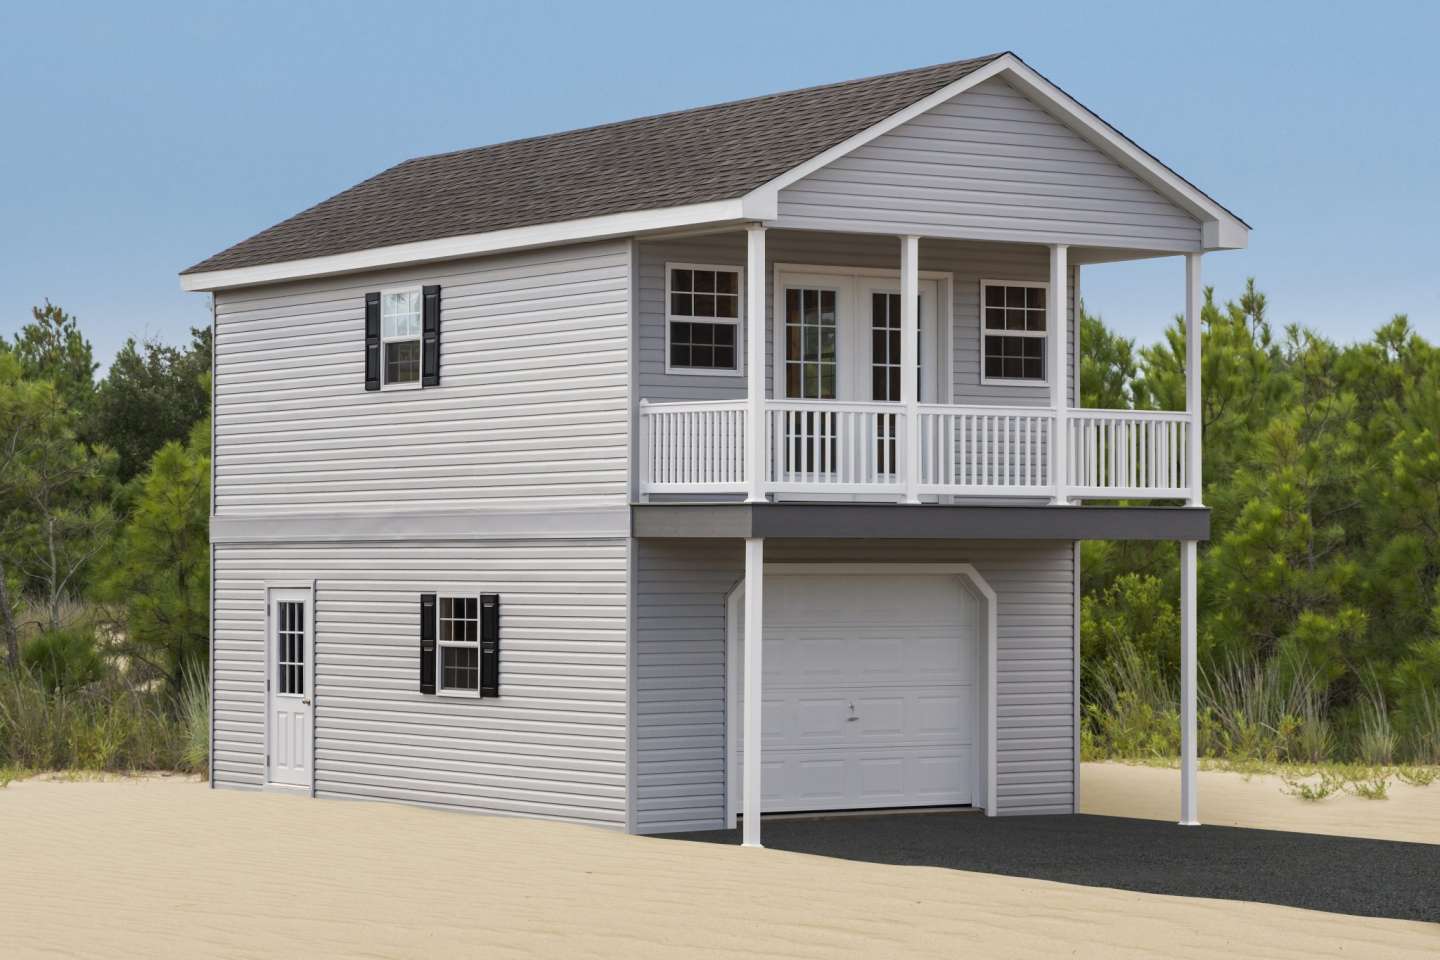 Prefab Two Story Garage With Living, How Much Does It Cost To Build A Garage With Living Quarters